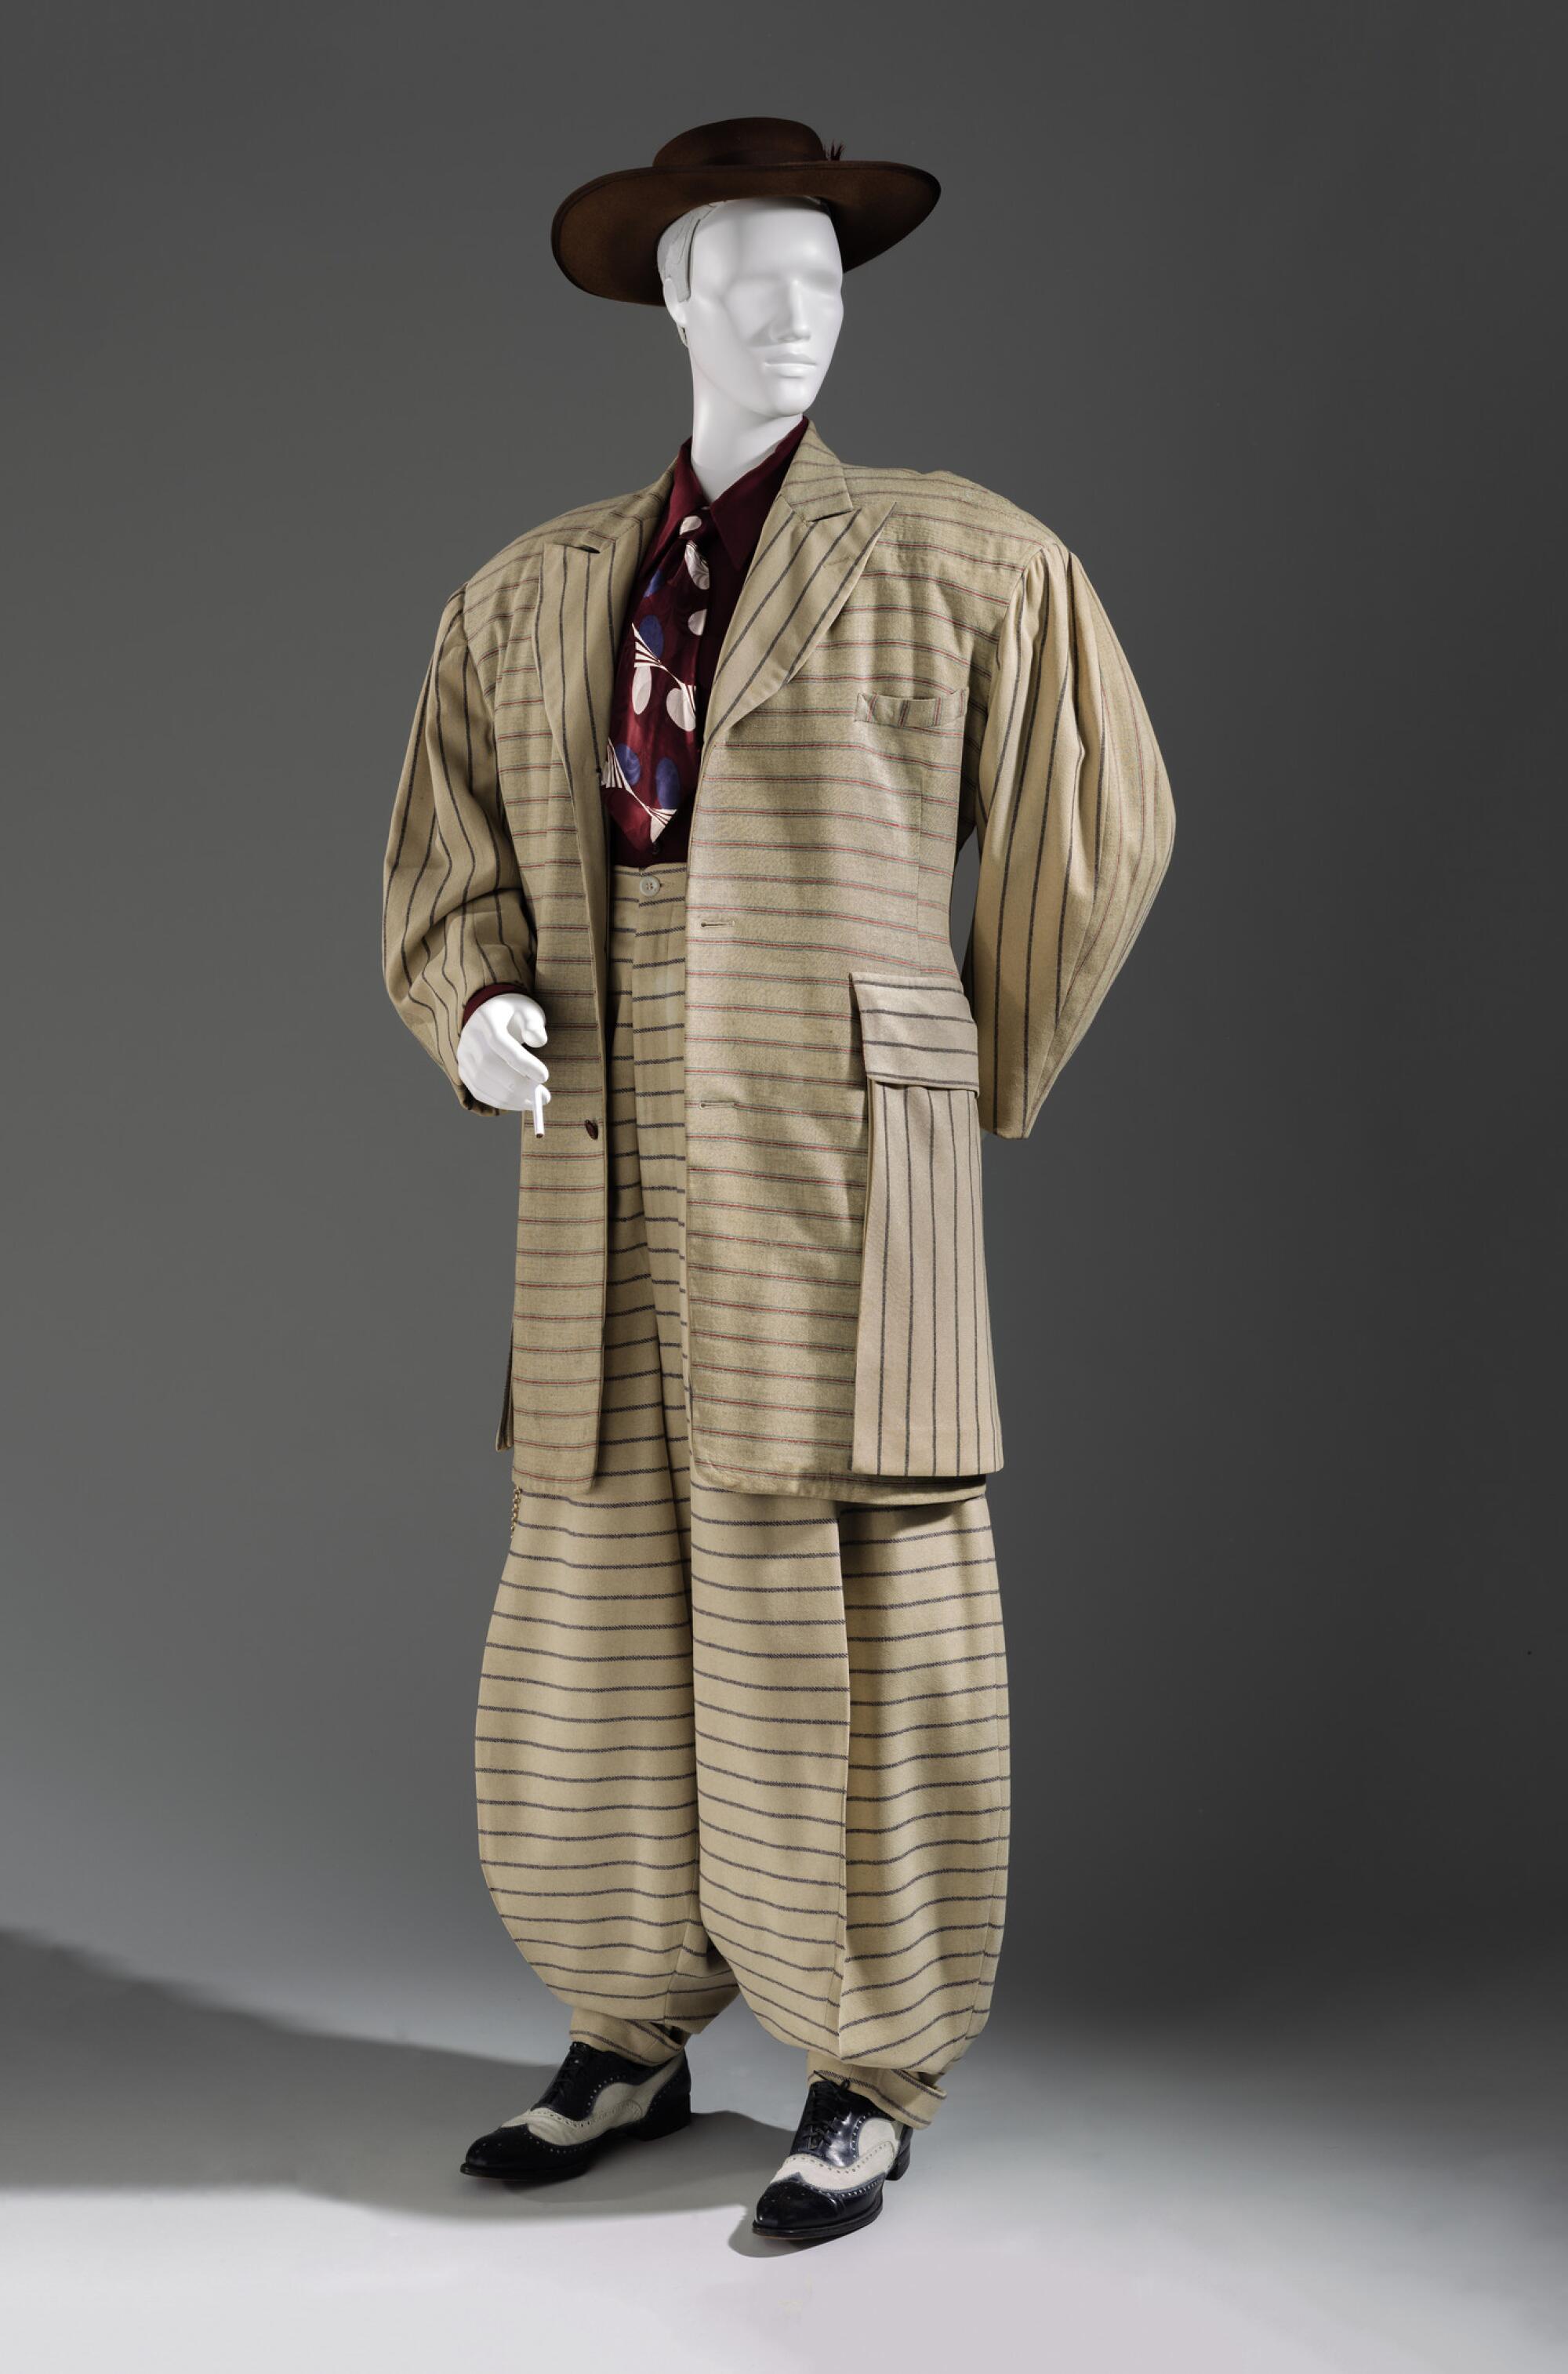 A mannequin dons a flamboyant pale yellow zoot suit with horizontal stripes and a burgundy shirt and tie.